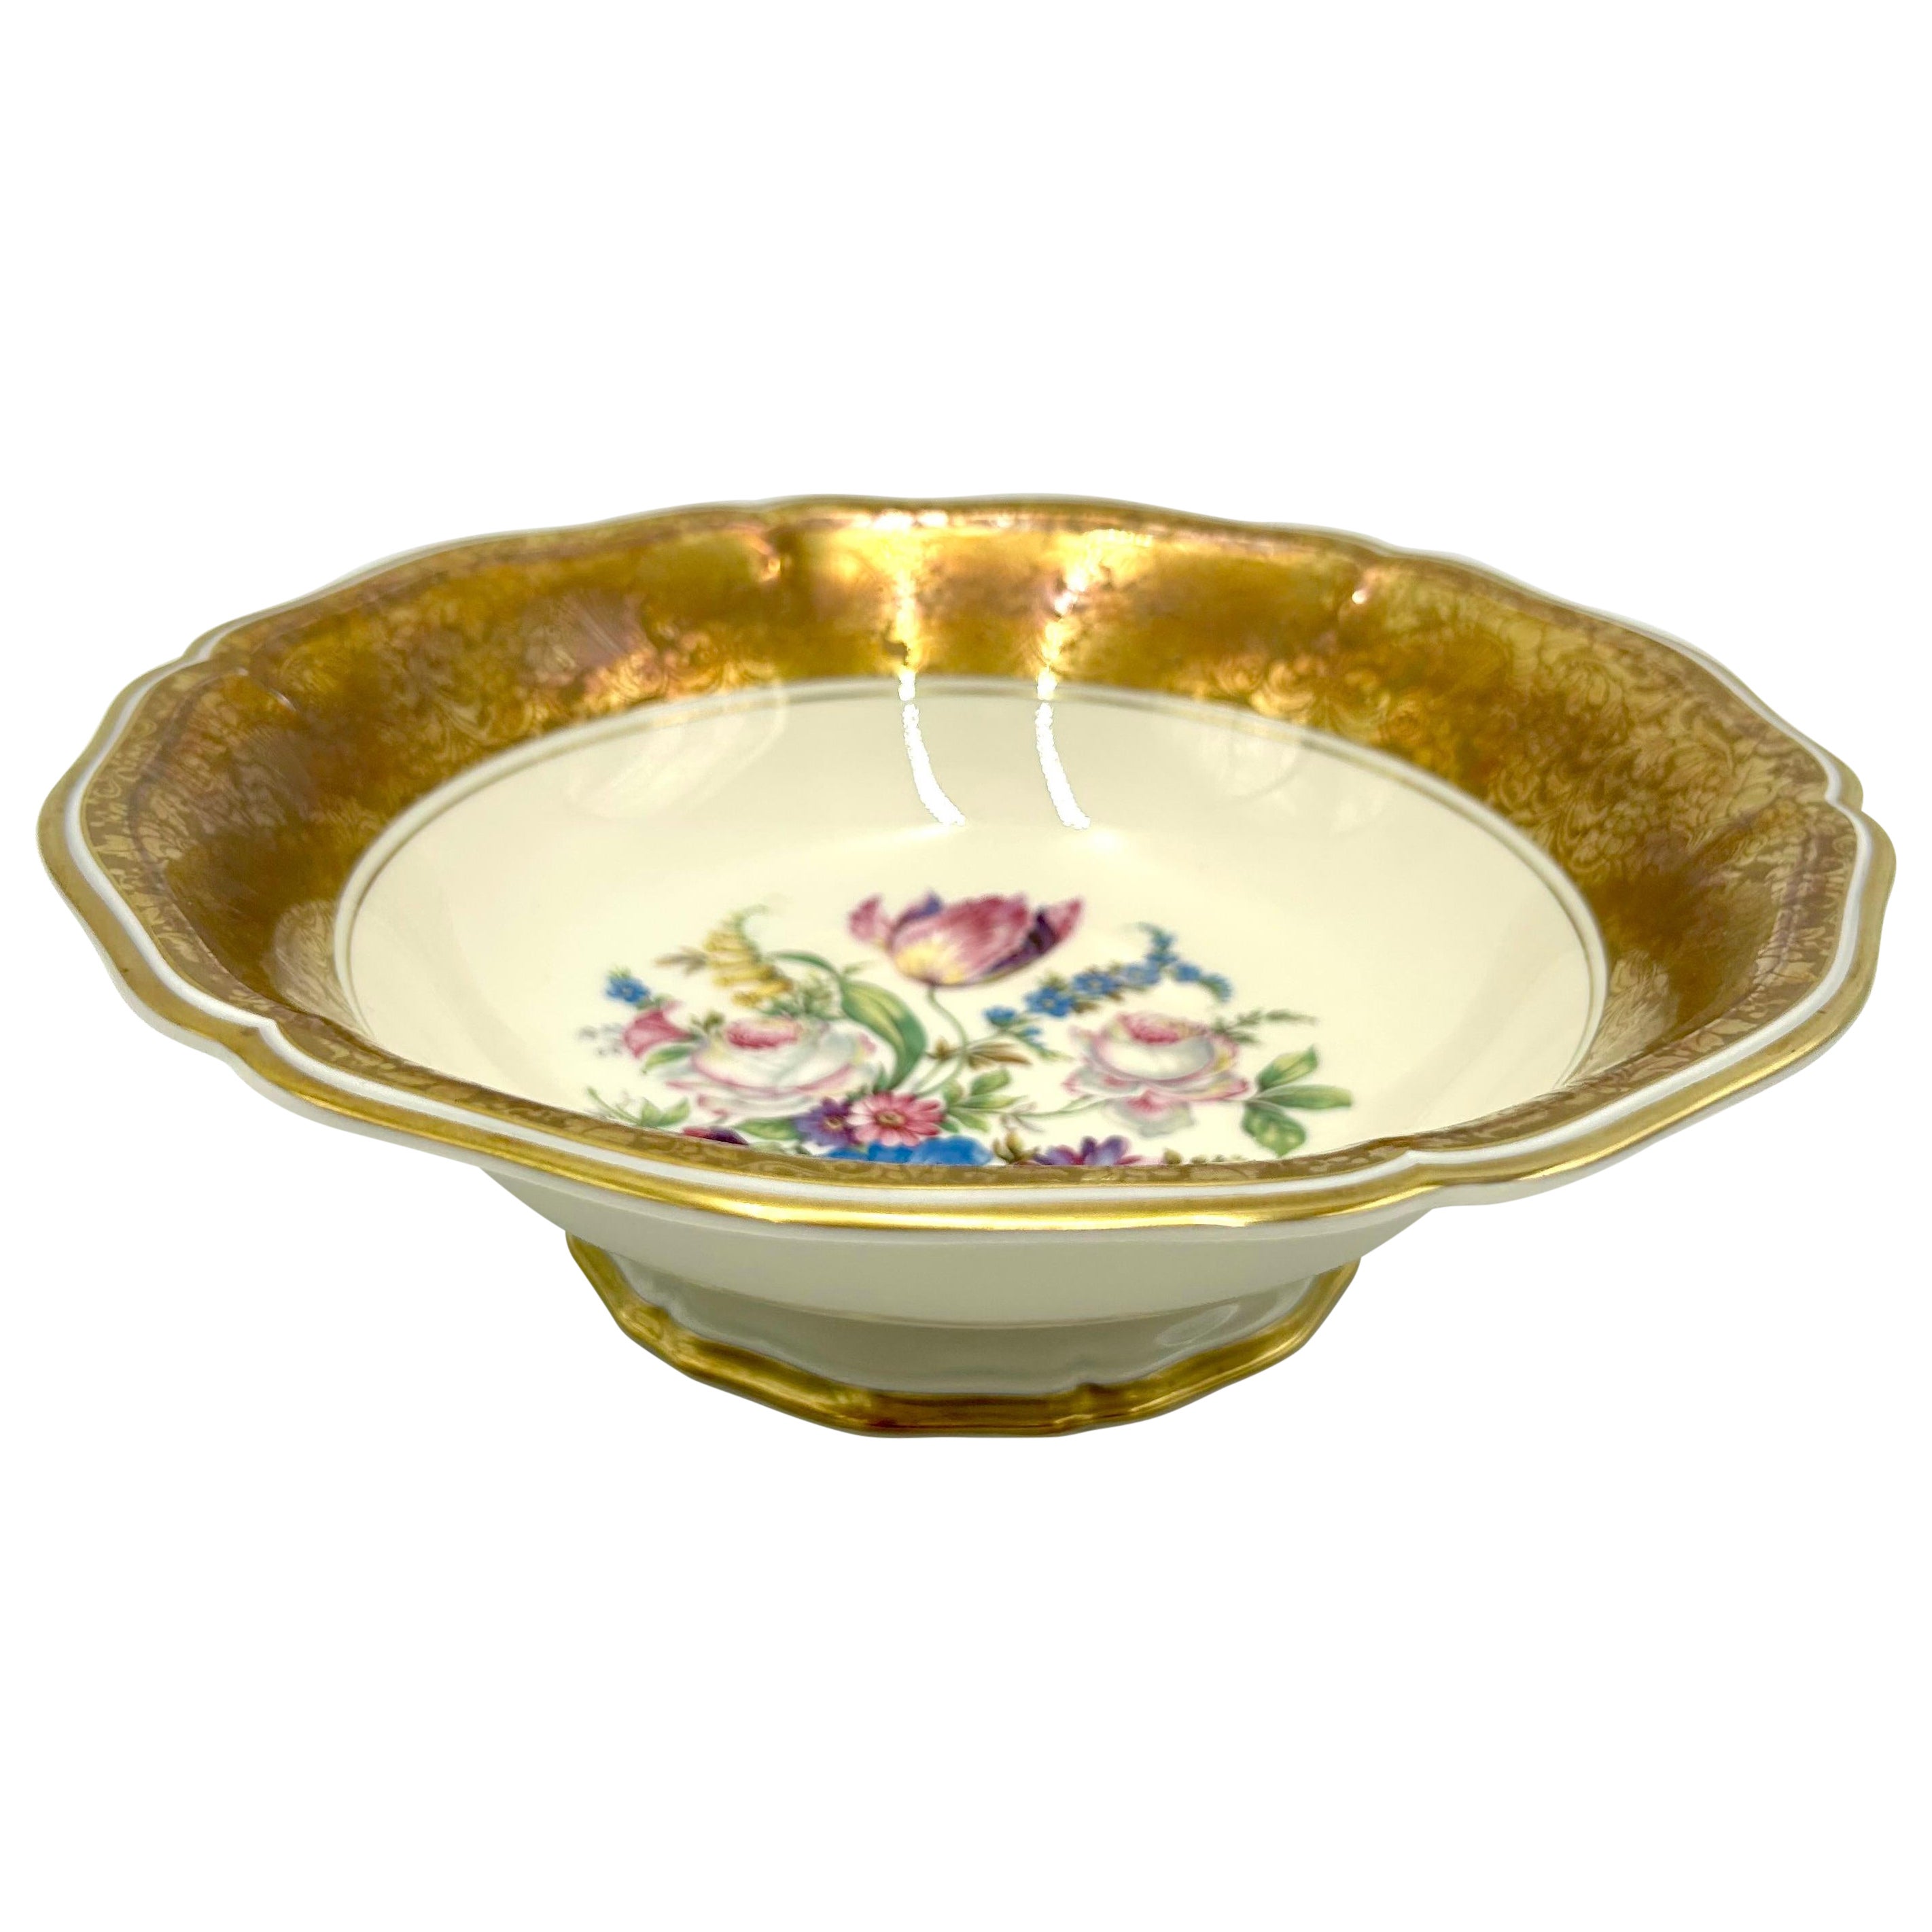 Bowl with Gilding, Rosenthal Chippendale, Germany, 1940s